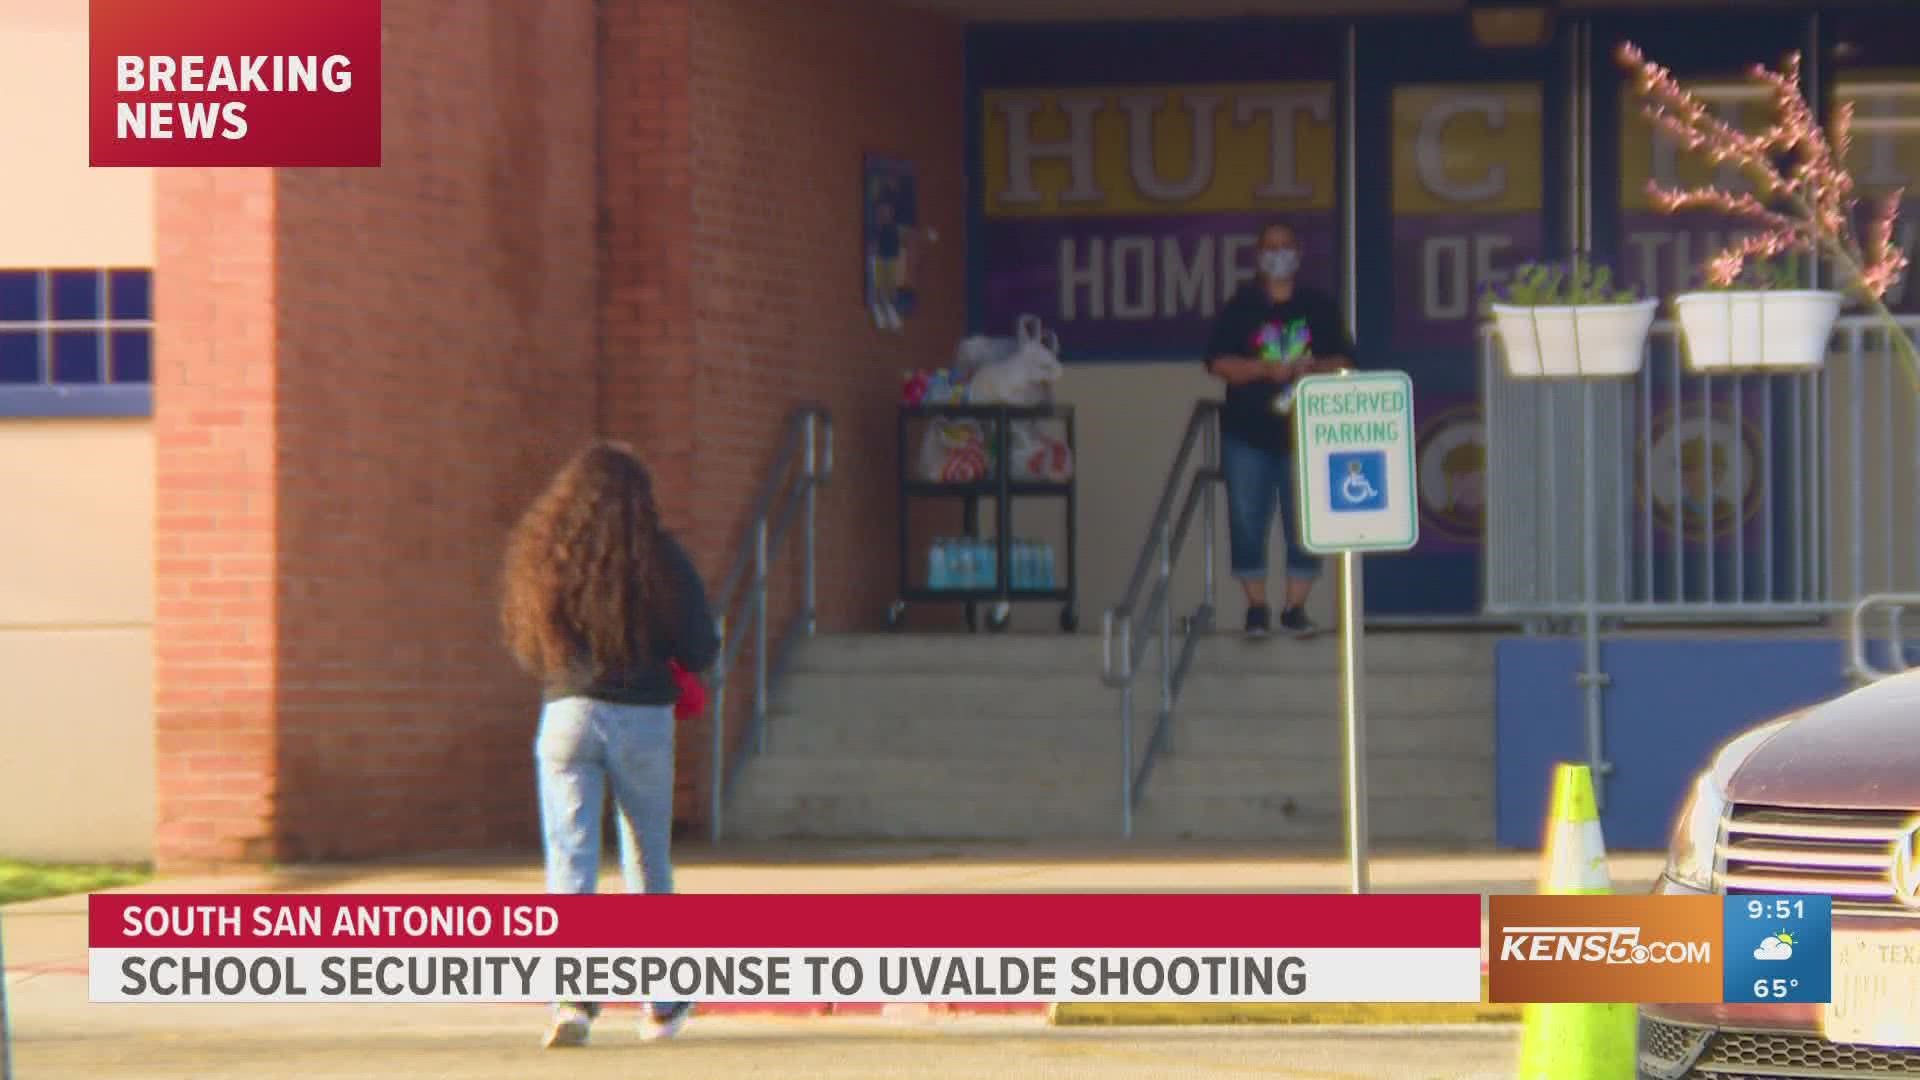 Several school districts are taking extra security measures following the deadly shooting at Robb Elementary that left 21 people dead.